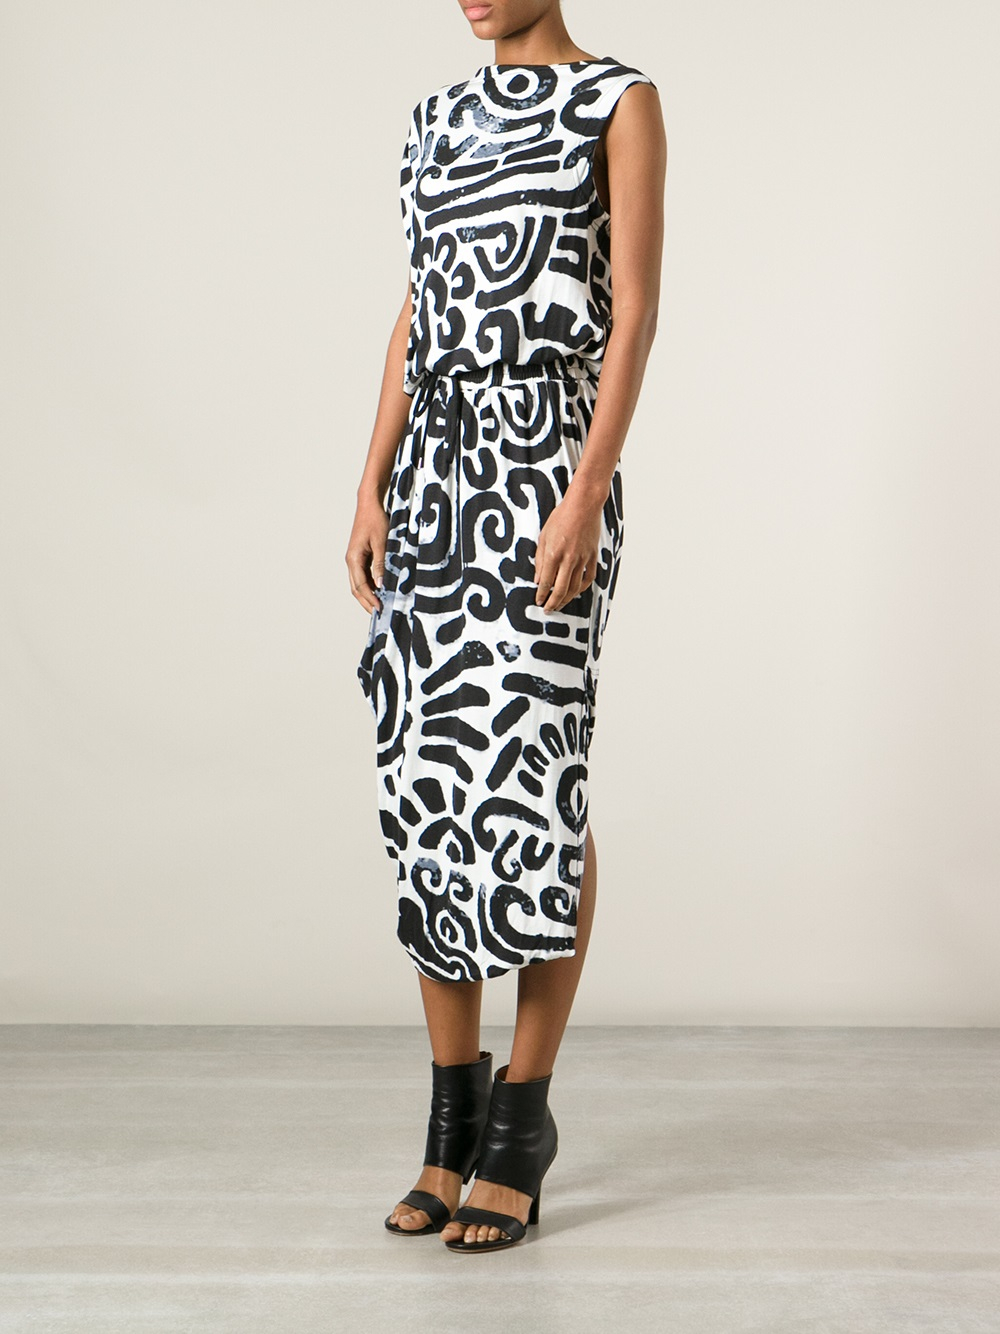 Vivienne Westwood Anglomania Aztec Print Dress in White (Black) - Lyst